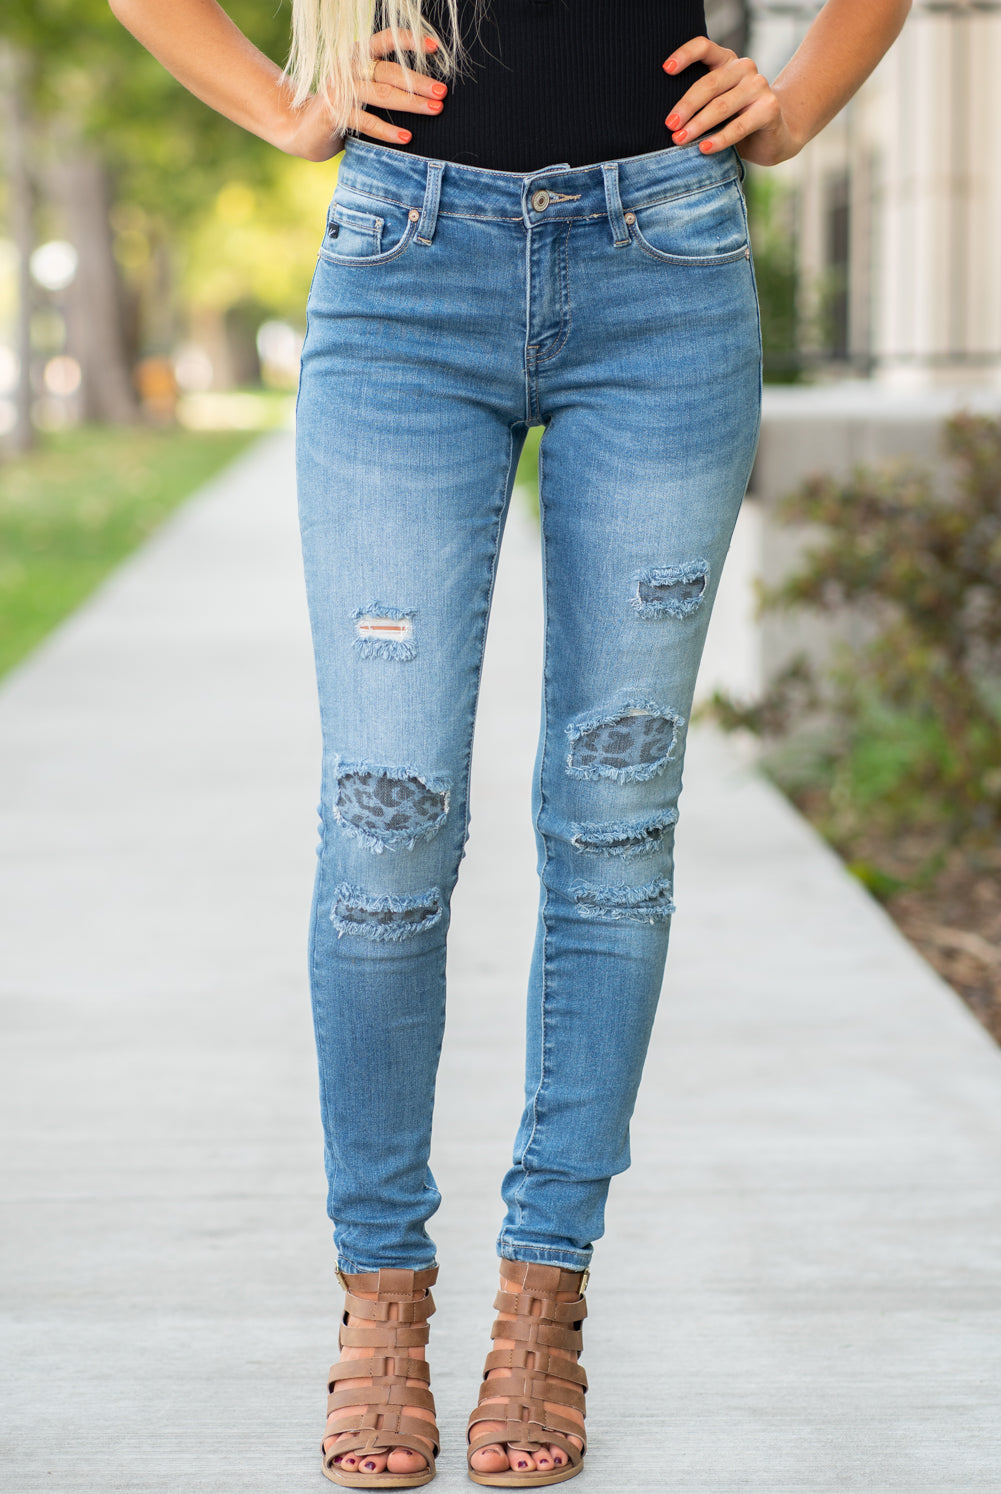 KanCan Jeans Collection: Fall 2020 Color: Medium Wash Skinny, 29.5" Inseam  Mid Rise, 8.5" Front Rise Leopard Patch Backed Distress  92% Cotton 6% Polyester 2% Spandex  Fly: Zipper Style #: KC6307D Contact us for any additional measurements or sizing.